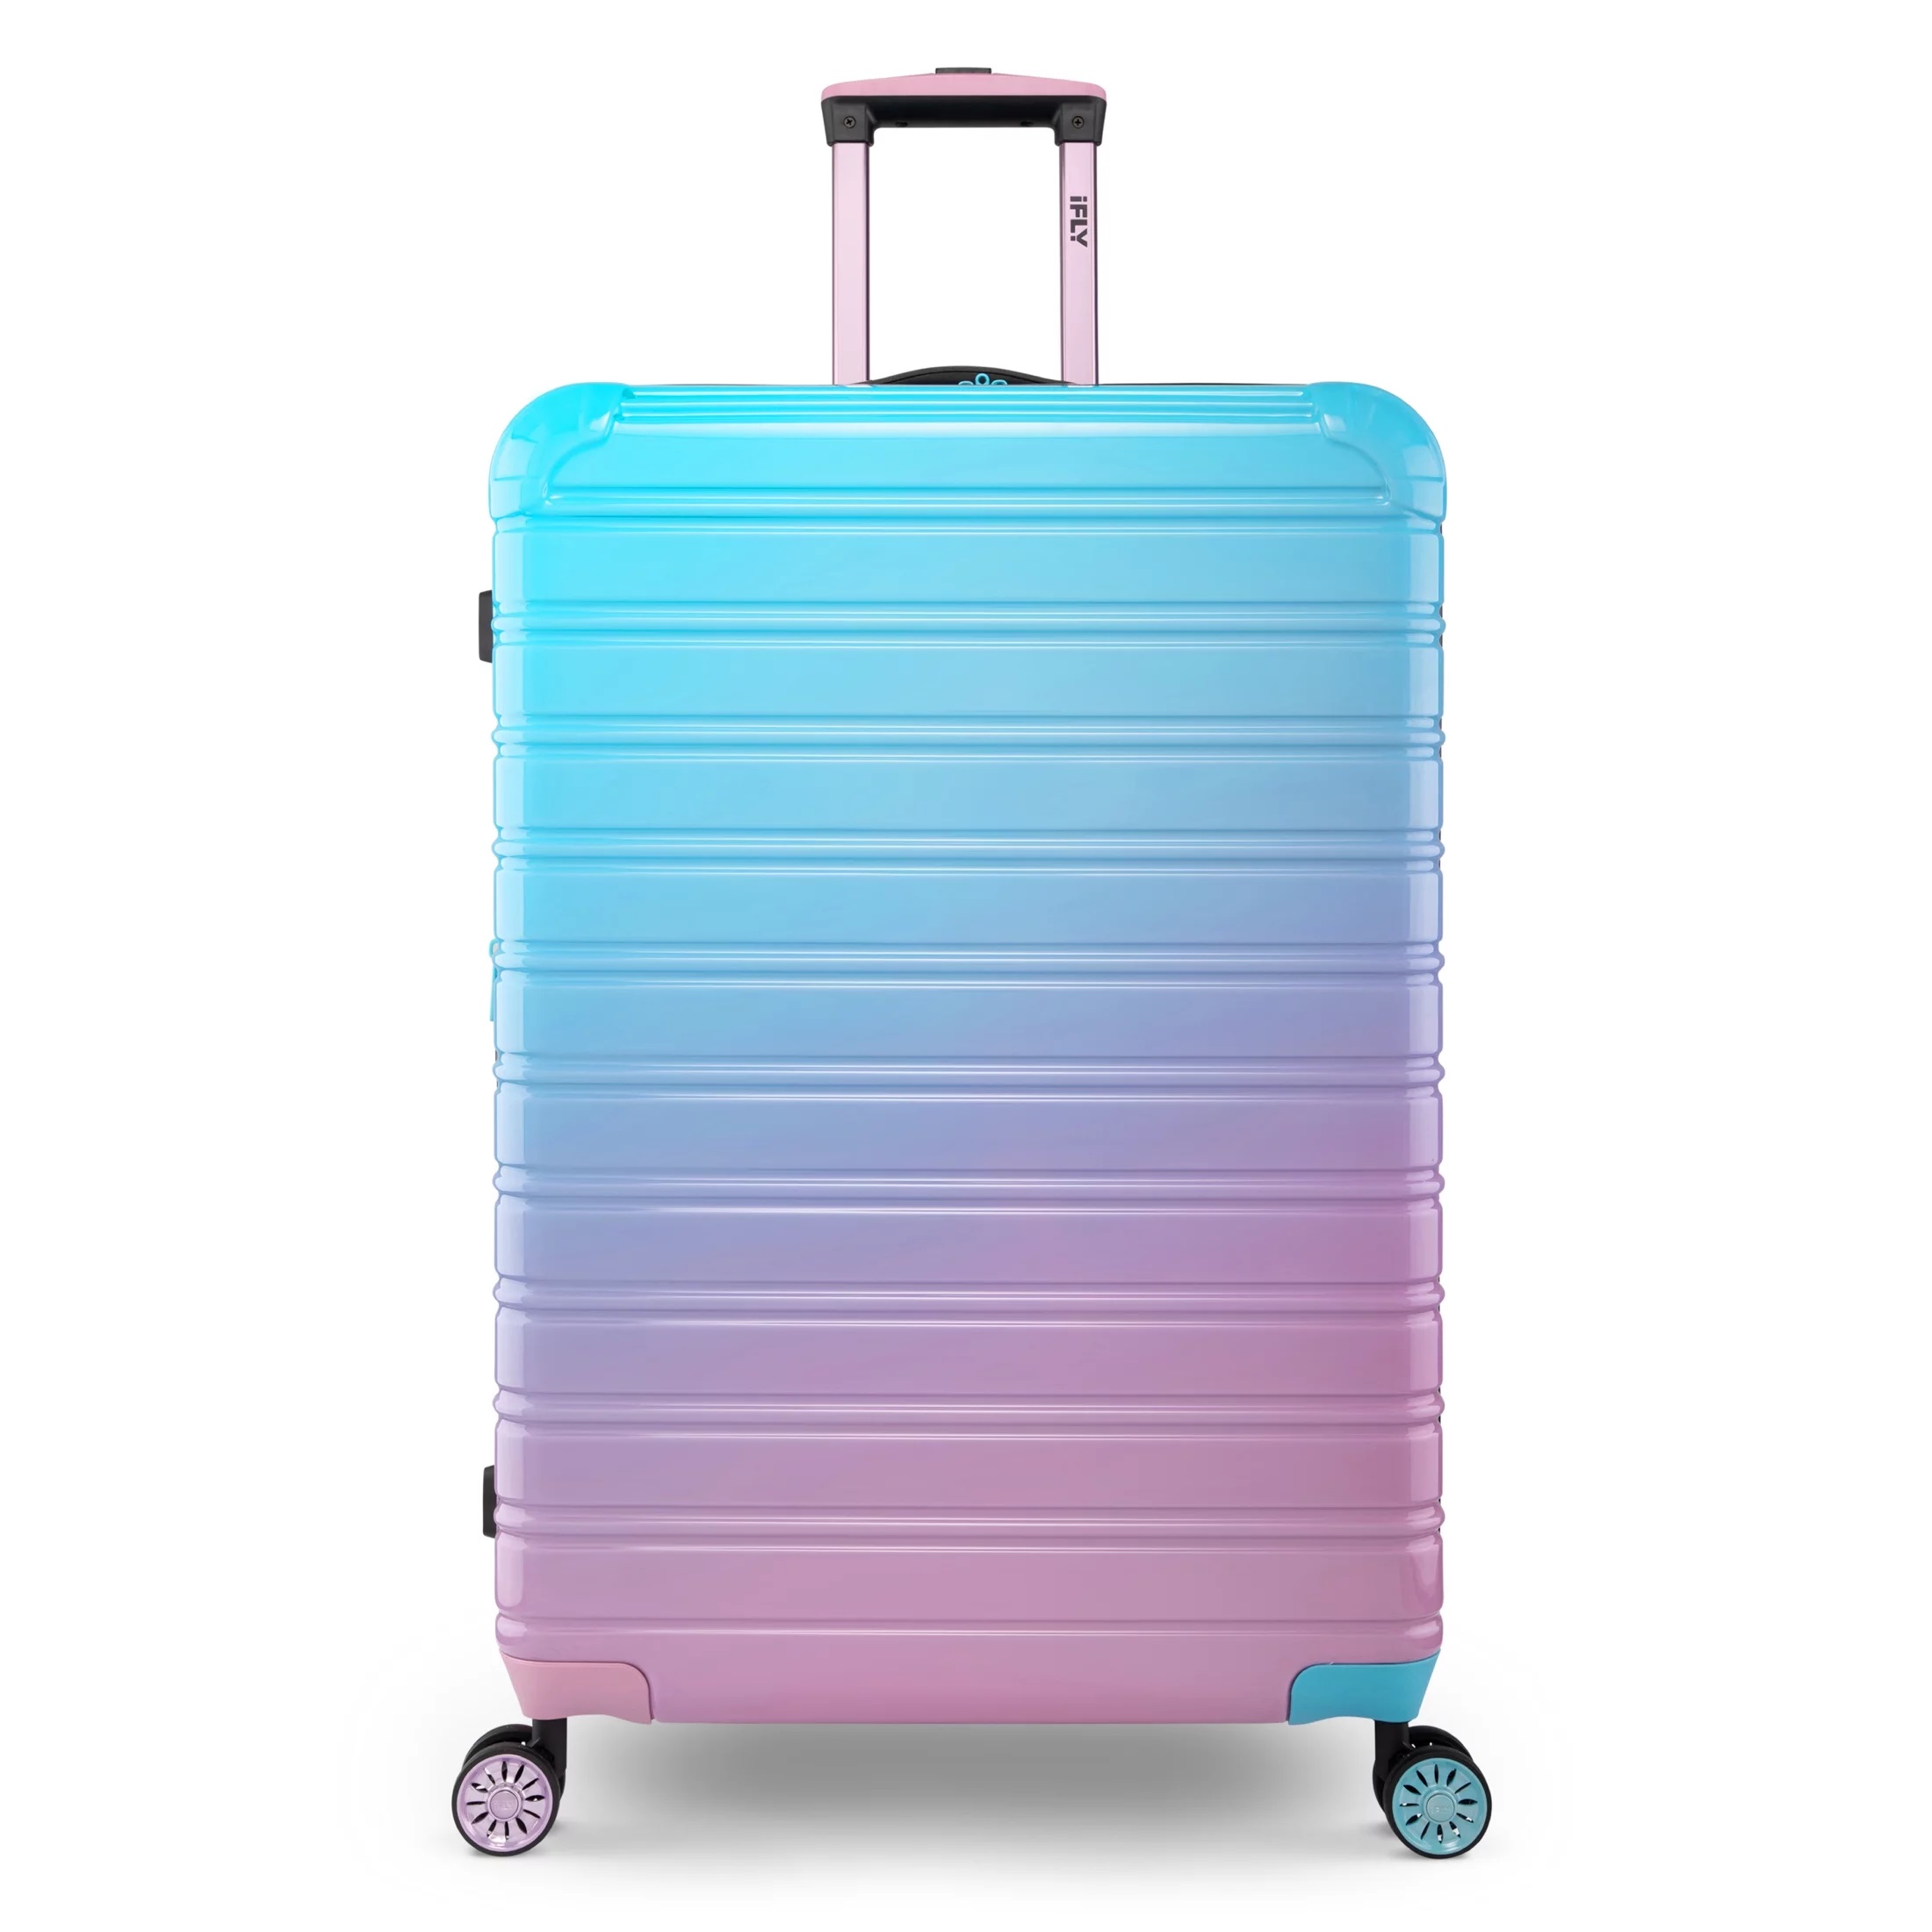 VALI DU LỊCH IFLY FIBERTECH OMBRE HARDSIDE LUGGAGE IN COTTON CANDY 10